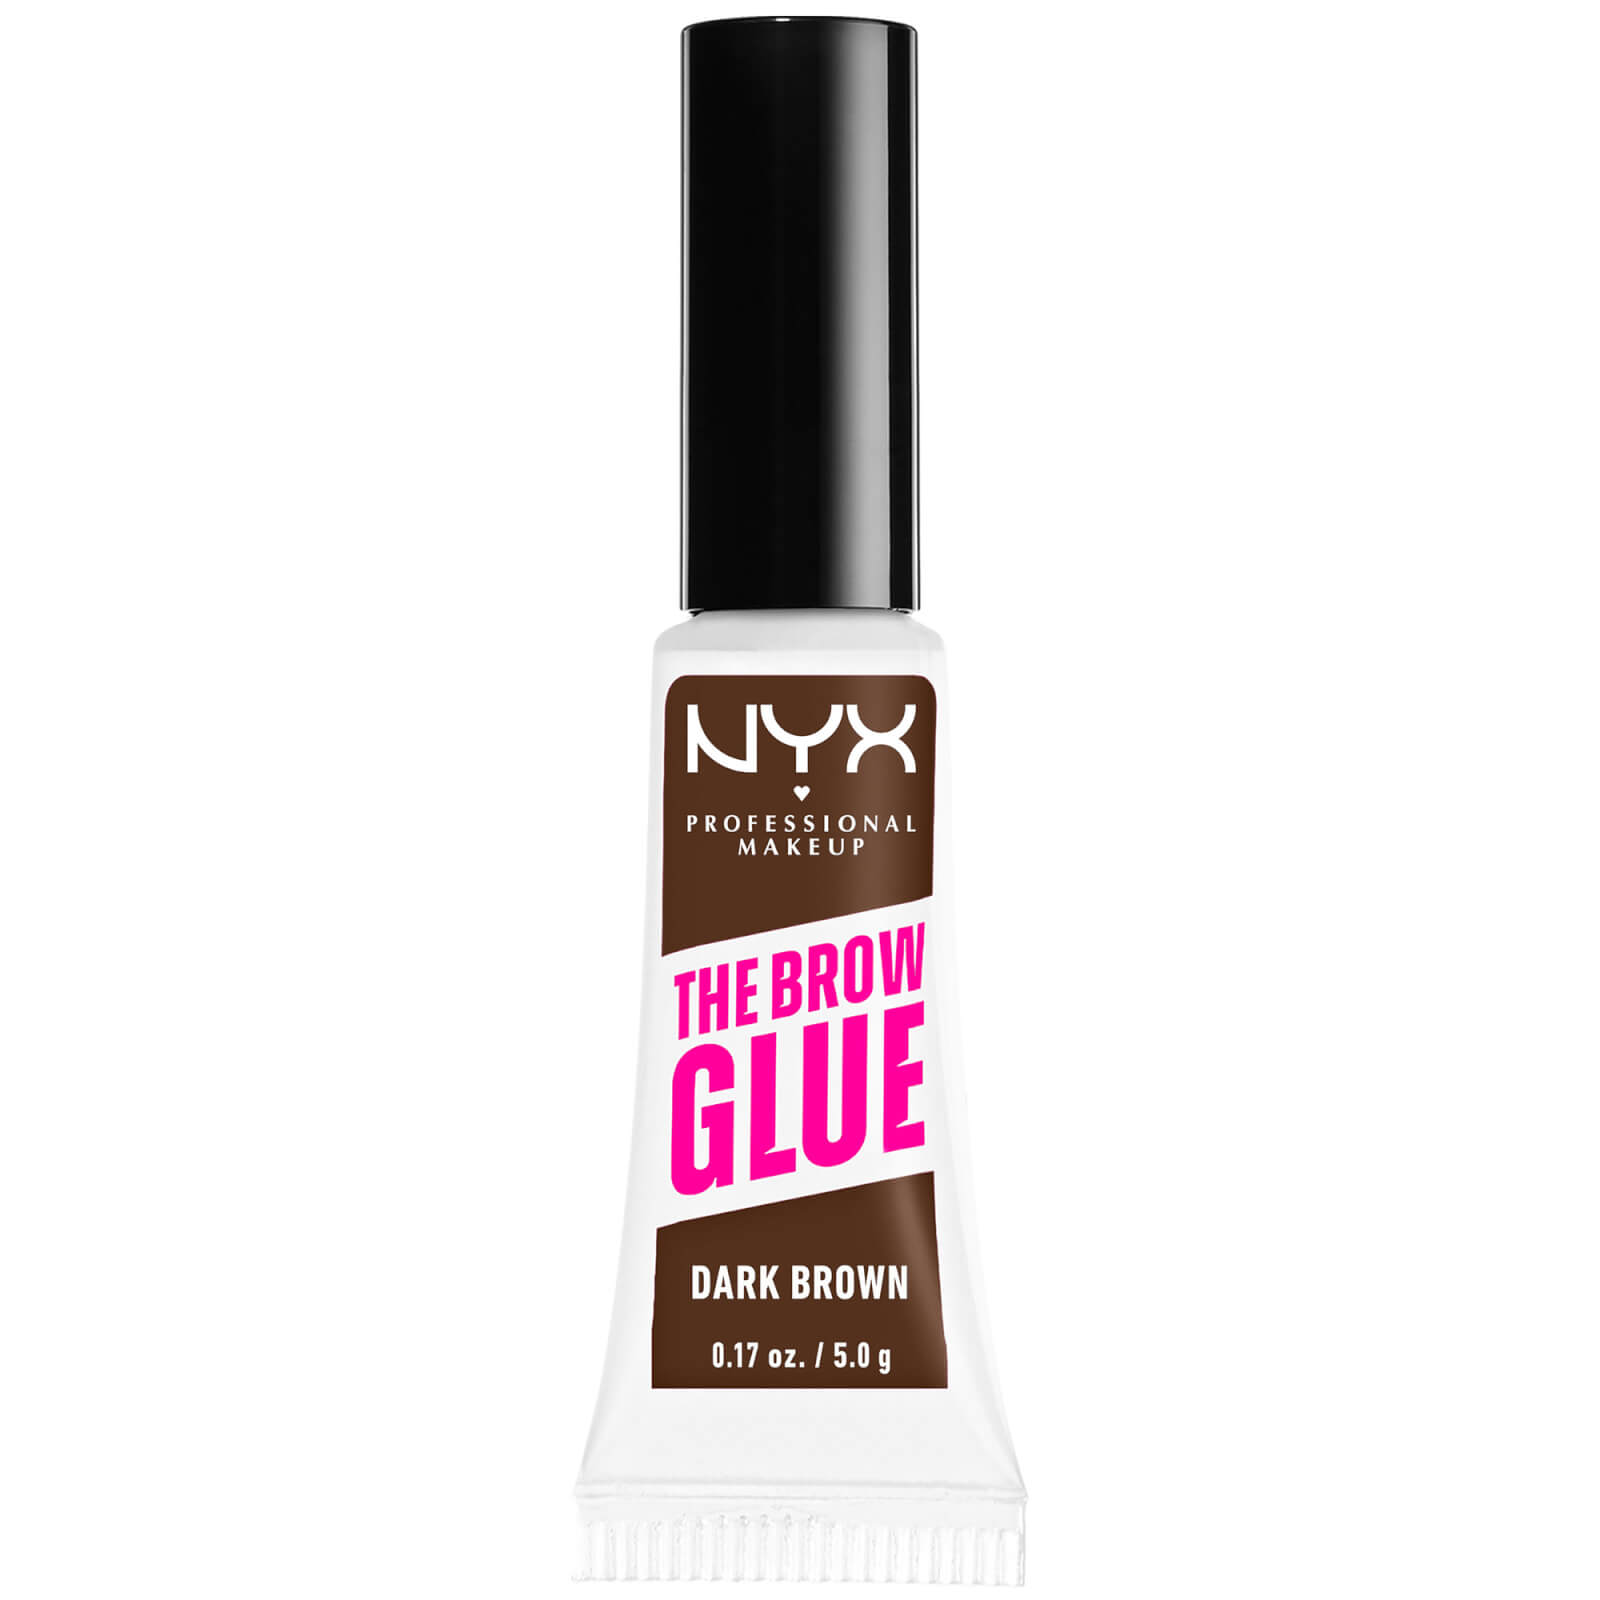 NYX Professional Makeup The Brow Glue Instant Styler 5g (Various Shades) - Dark Brown